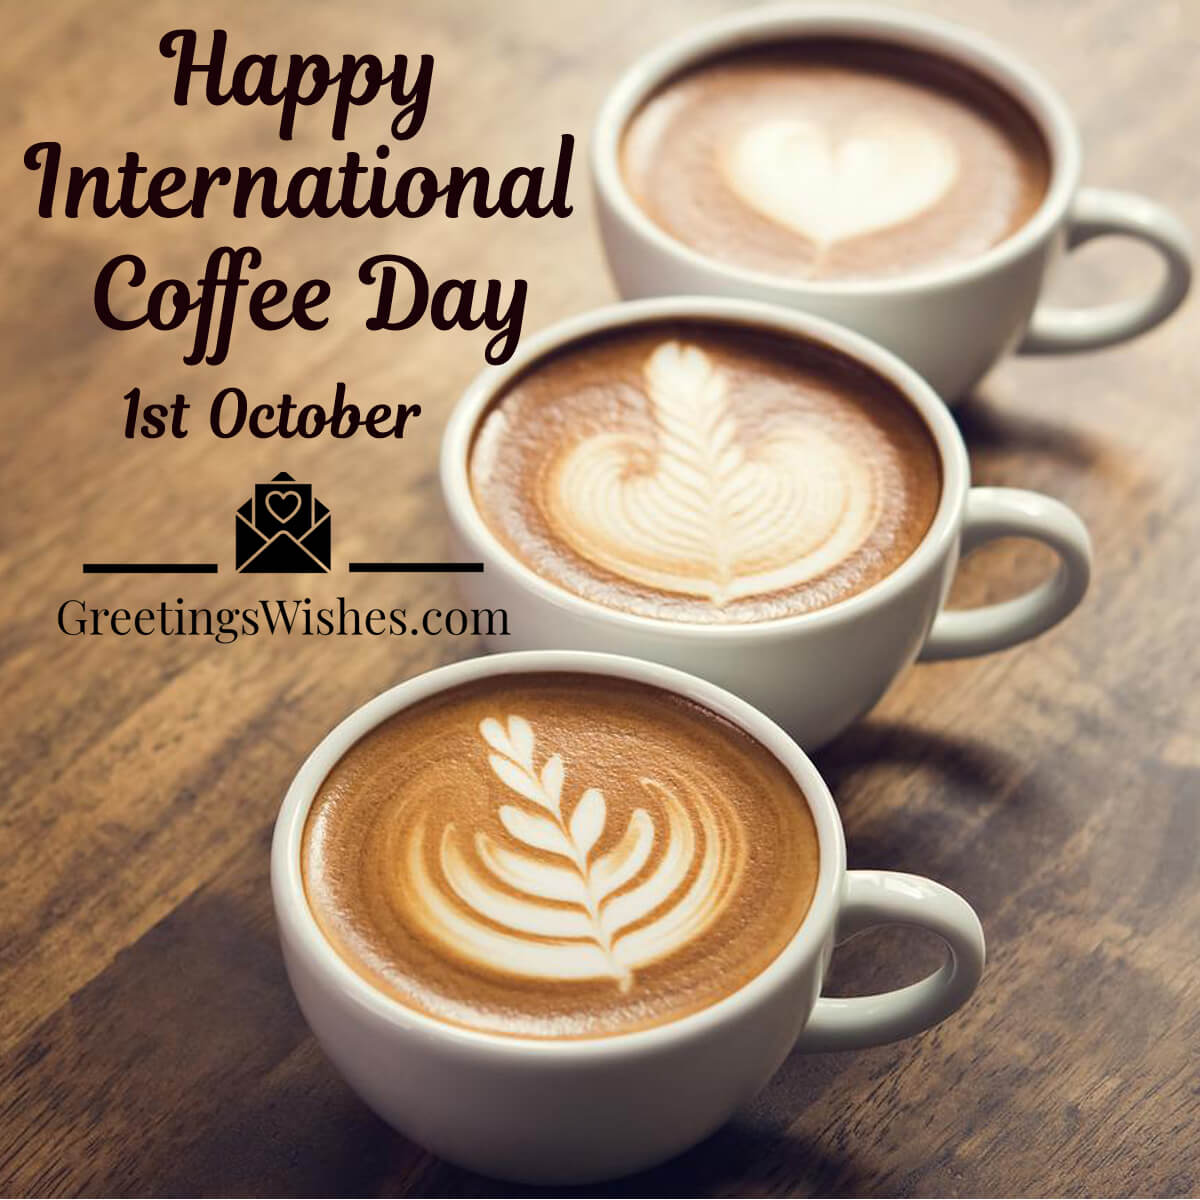 International Coffee Day Wishes (1st October)